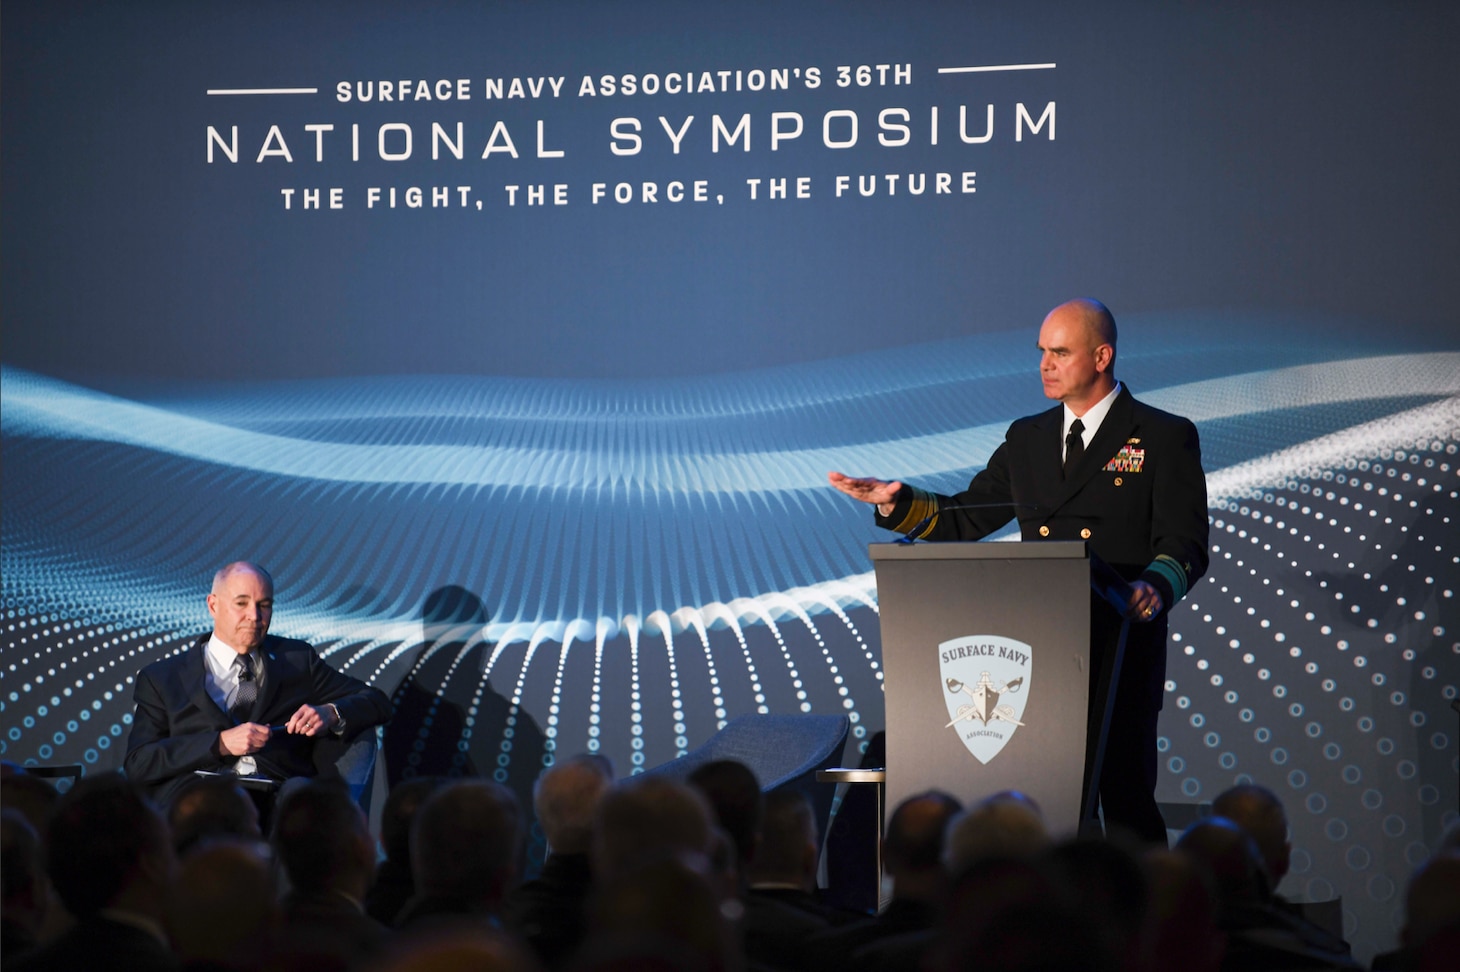 ARLINGTON Va. (Jan. 09, 2024)  Commander, Naval Surface Forces, U.S. Pacific Fleet Vice Adm. Brendan McLane delivers remarks at the Surface Navy Association’s (SNA) 36th National Symposium. The Symposium brings together joint experts and decision-makers in the military, industry, and Congress to discuss how the Surface Force is a critical element of national defense and security. (U.S. Navy photo by Mass Communication Specialist 1st Class Kelby Sanders)